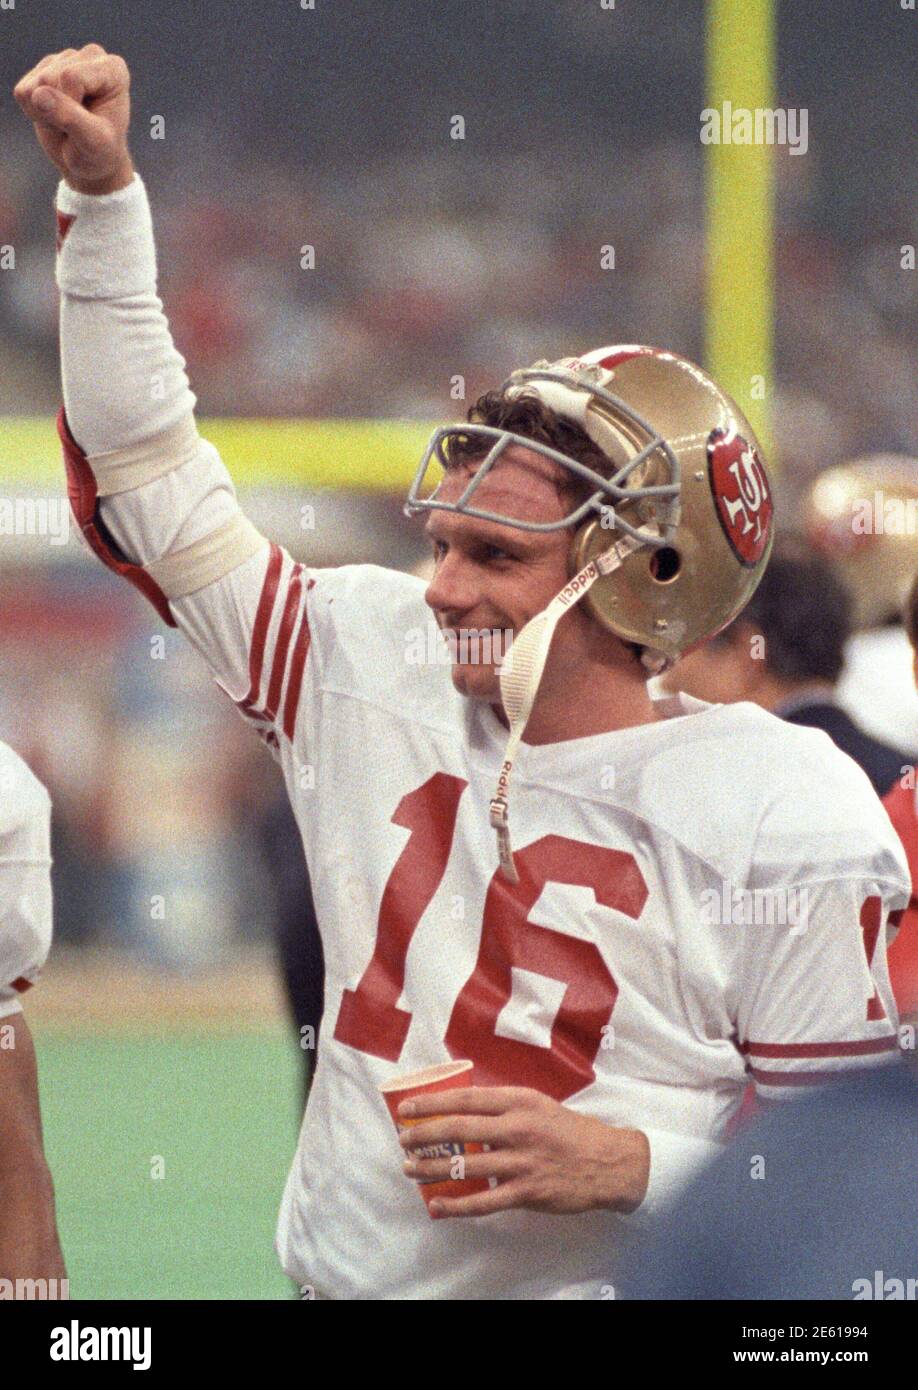 San Francisco 49ers quarterback Joe Montana celebrates late in the 4th quarter of the Superbowl as victory was assured for the 49ers over the Denver Broncos in New Orleans January 29, 1990.  The games ended with the 49ers winning 55 - 10.  REUTERS/Rick Wilking   (UNITED STATES  - Tags: SPORT) Stock Photo